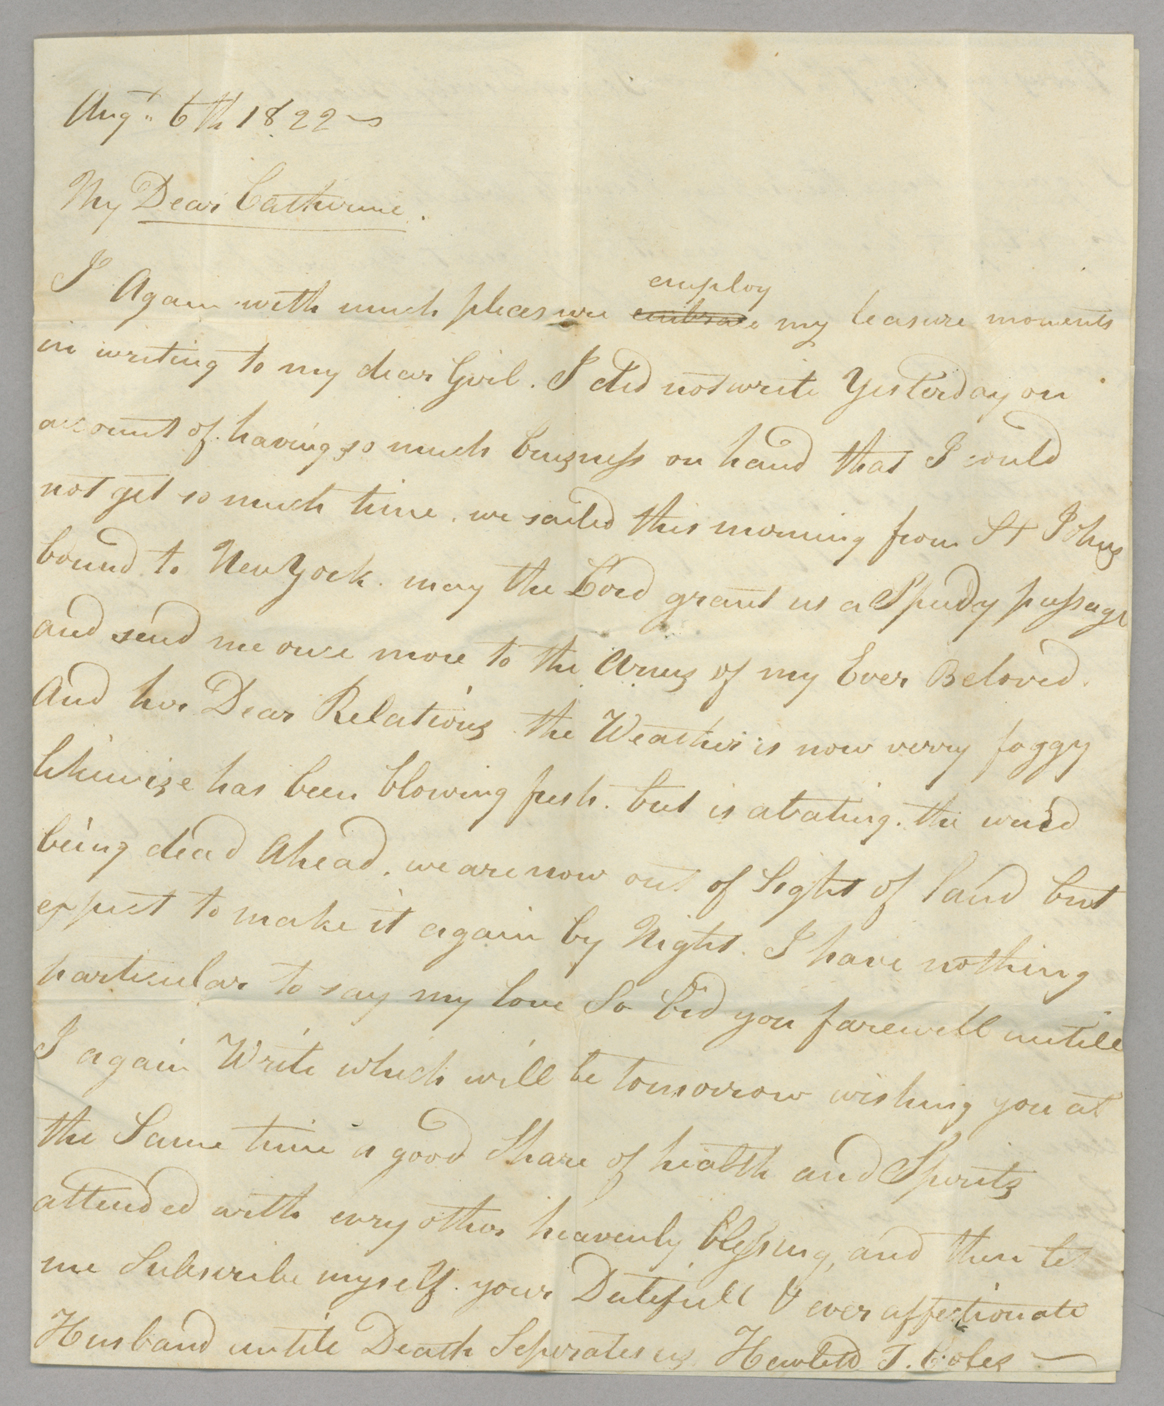 Letter, Hewlett T[ownsend] Coles, St. John's, Newfoundland, to "My Dear Catherine," [Catherine Van Suydam Coles], n.p., Page 1